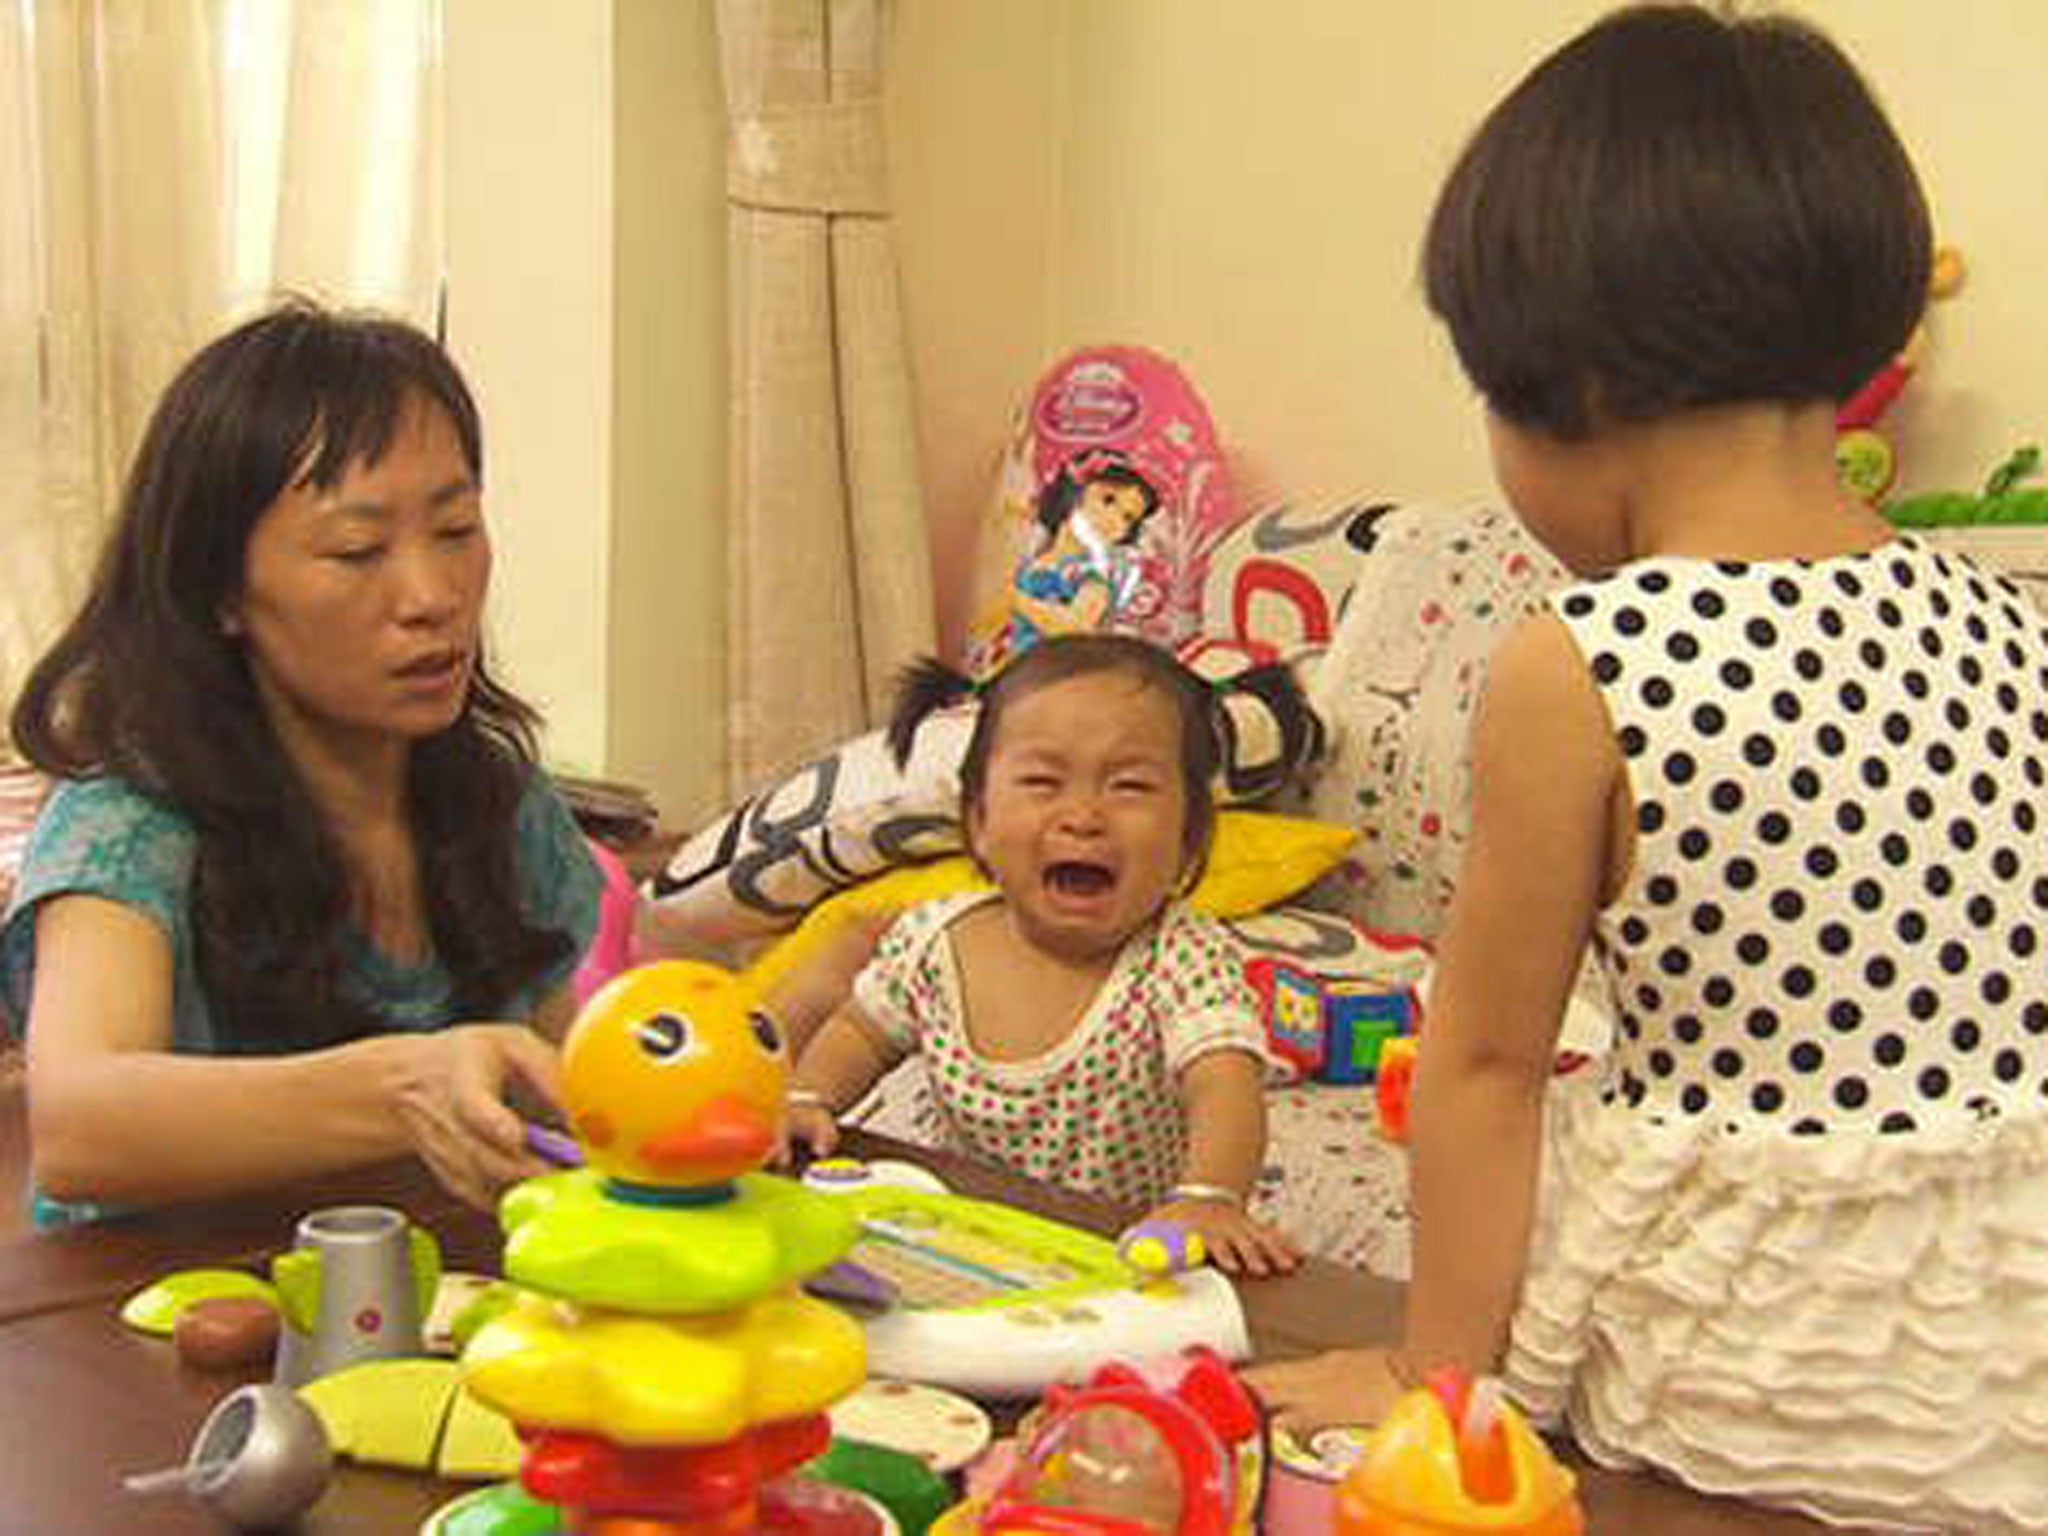 The Chinese version of ‘Supernanny’ is hoping to capitalise on the success of the British version